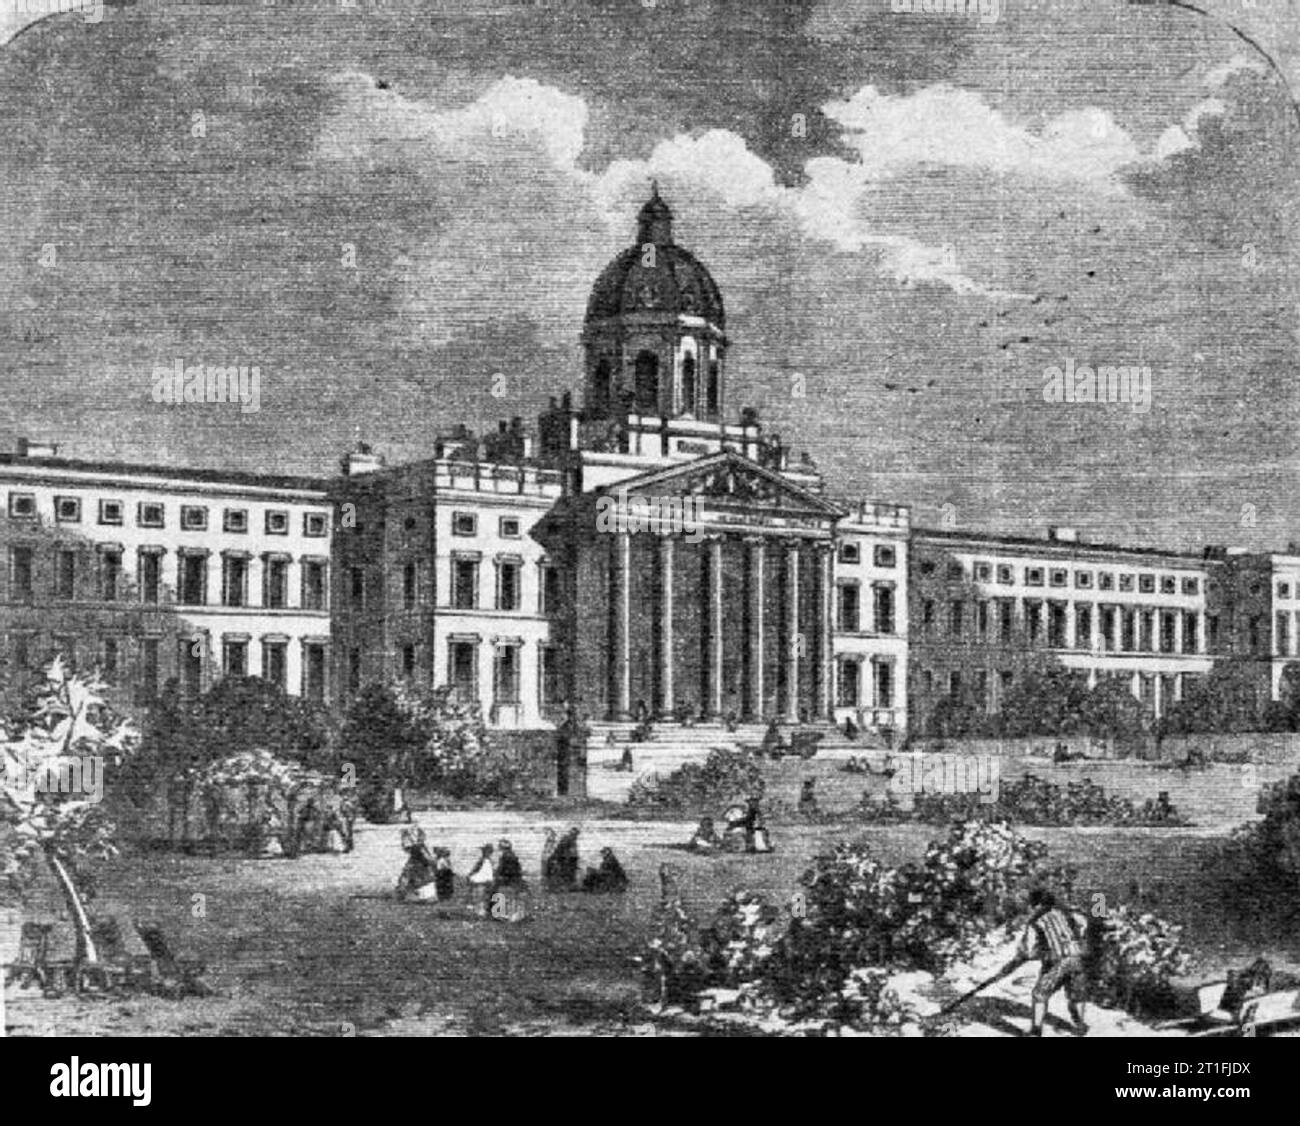 History of the Imperial War Museum- the Bethlem Royal Hospital A copy of a 19th century print showing the exterior of the Bethlem Royal Hospital at Lambeth Road, London. The building subsequently became the home of the Imperial War Museum in 1936. The picture shows the two large wings to either side of the main building, which were demolished to form the space now occupied by the Geraldine Mary Harmsworth Park. Stock Photo